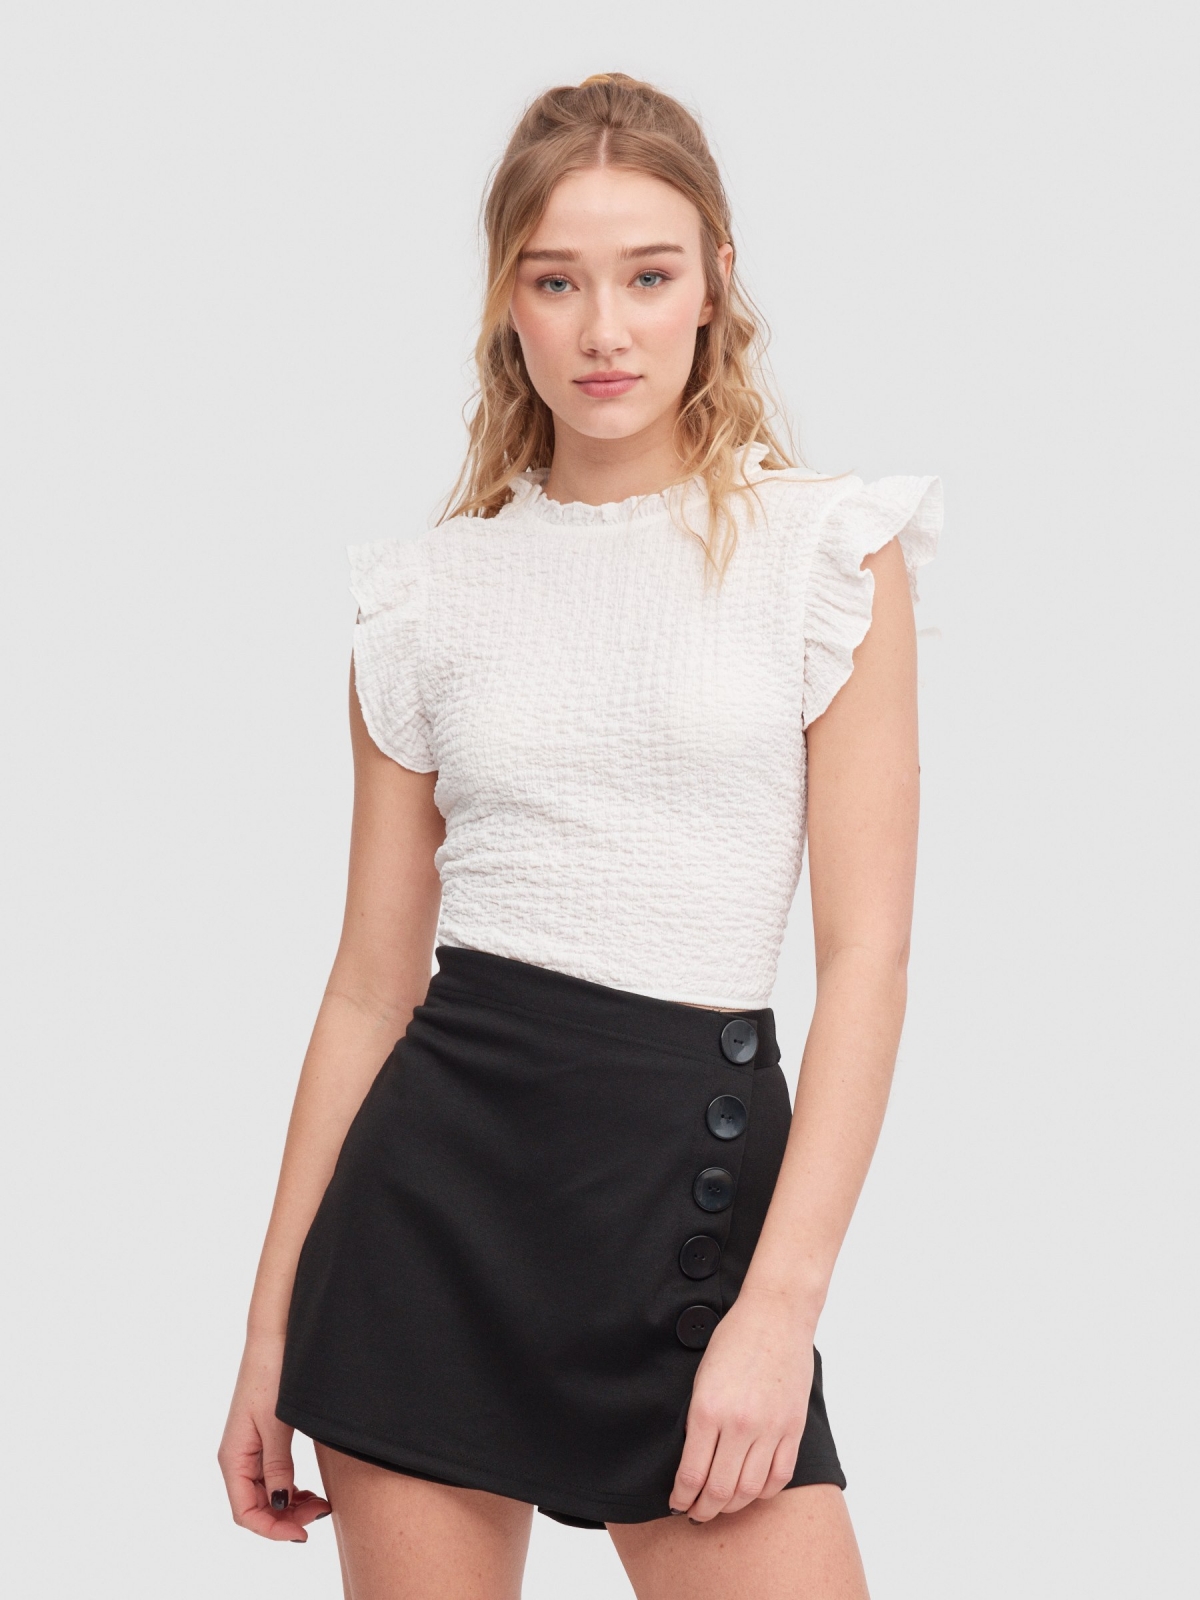 Buttoned skort black middle front view